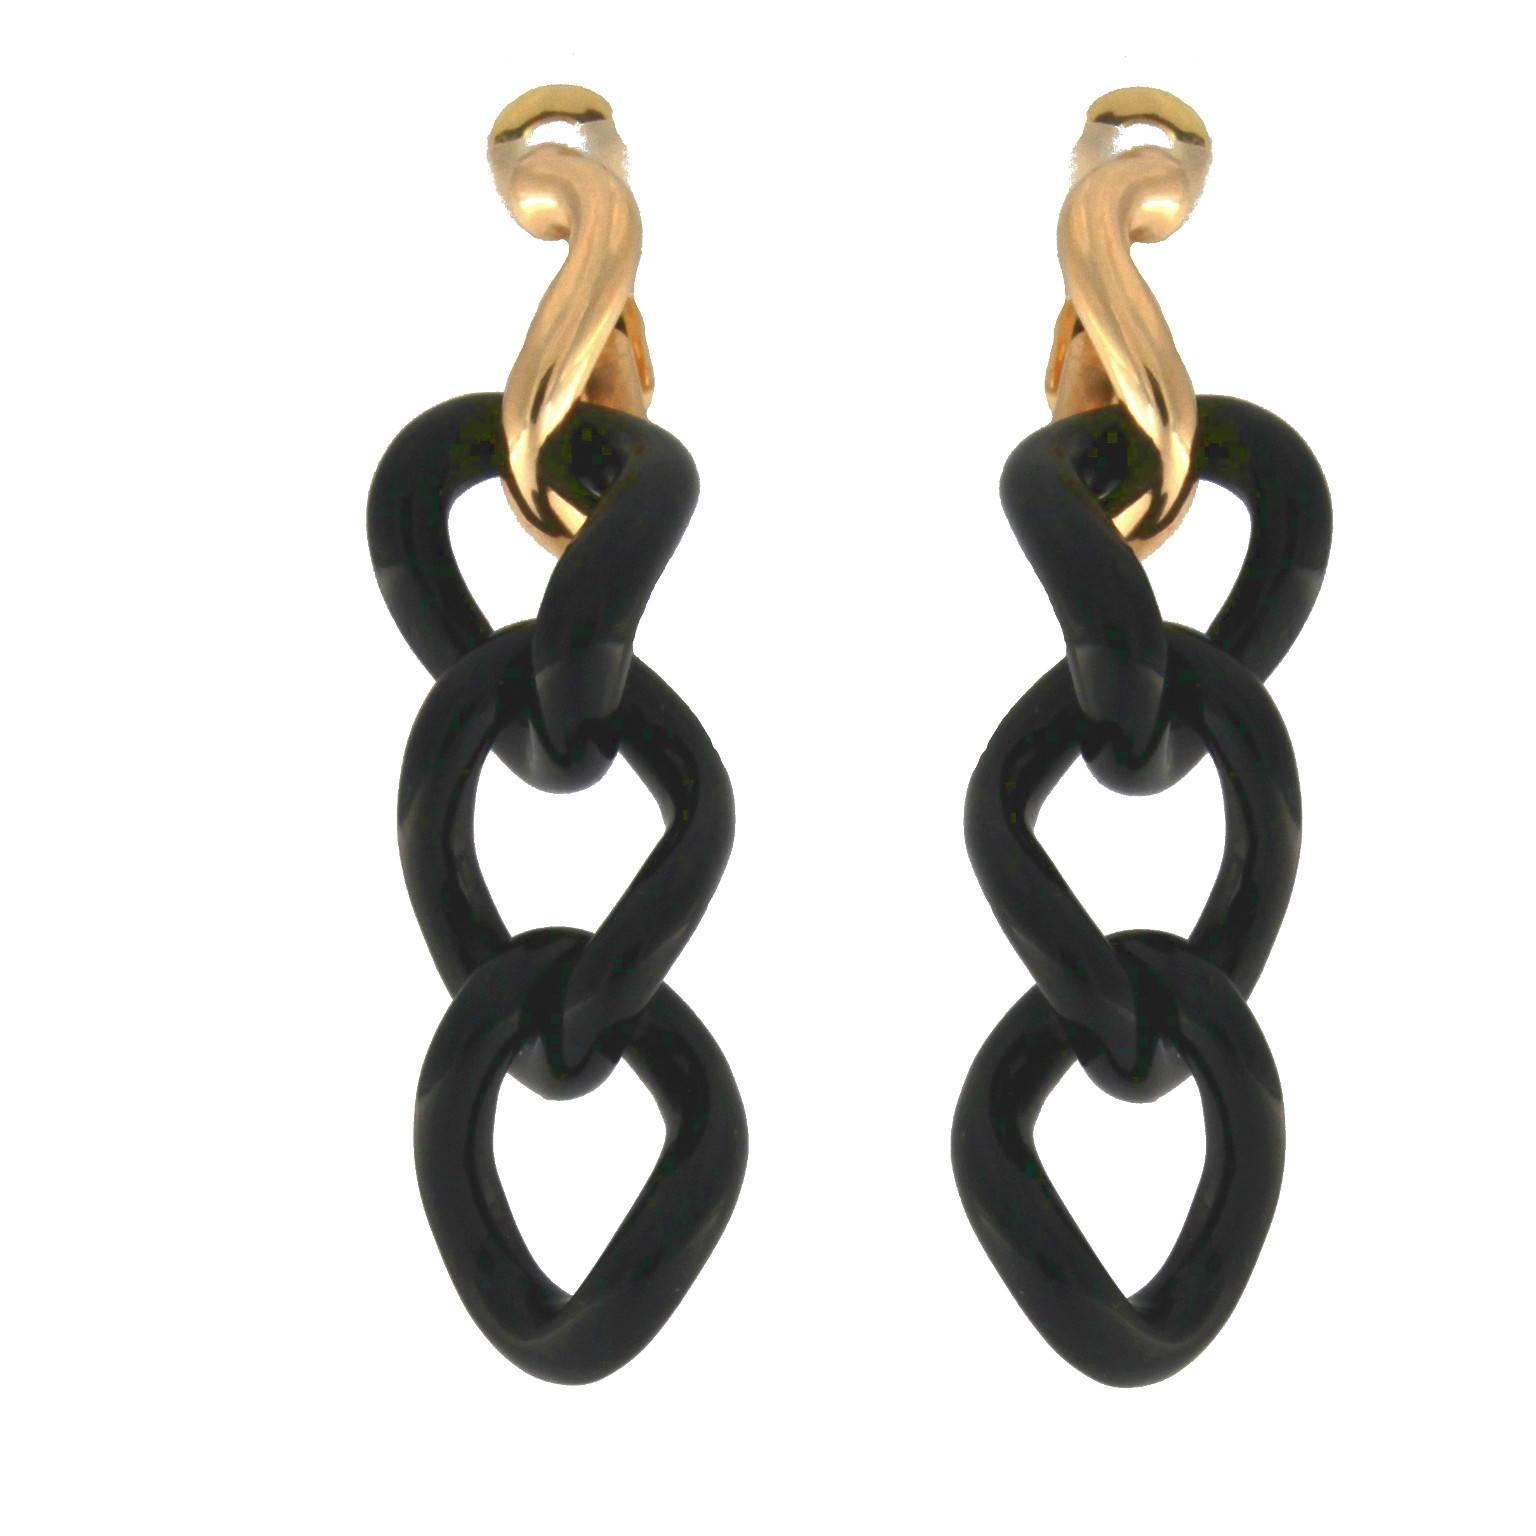 Groumette earrings in rose gold and black onyx. 
Essential and refined Design for this pair of earrings made entirely by hand.
The total weight of gold is GR 11.30
The weight of Onyx is GR 8.40
Stamp 10 MI 750
